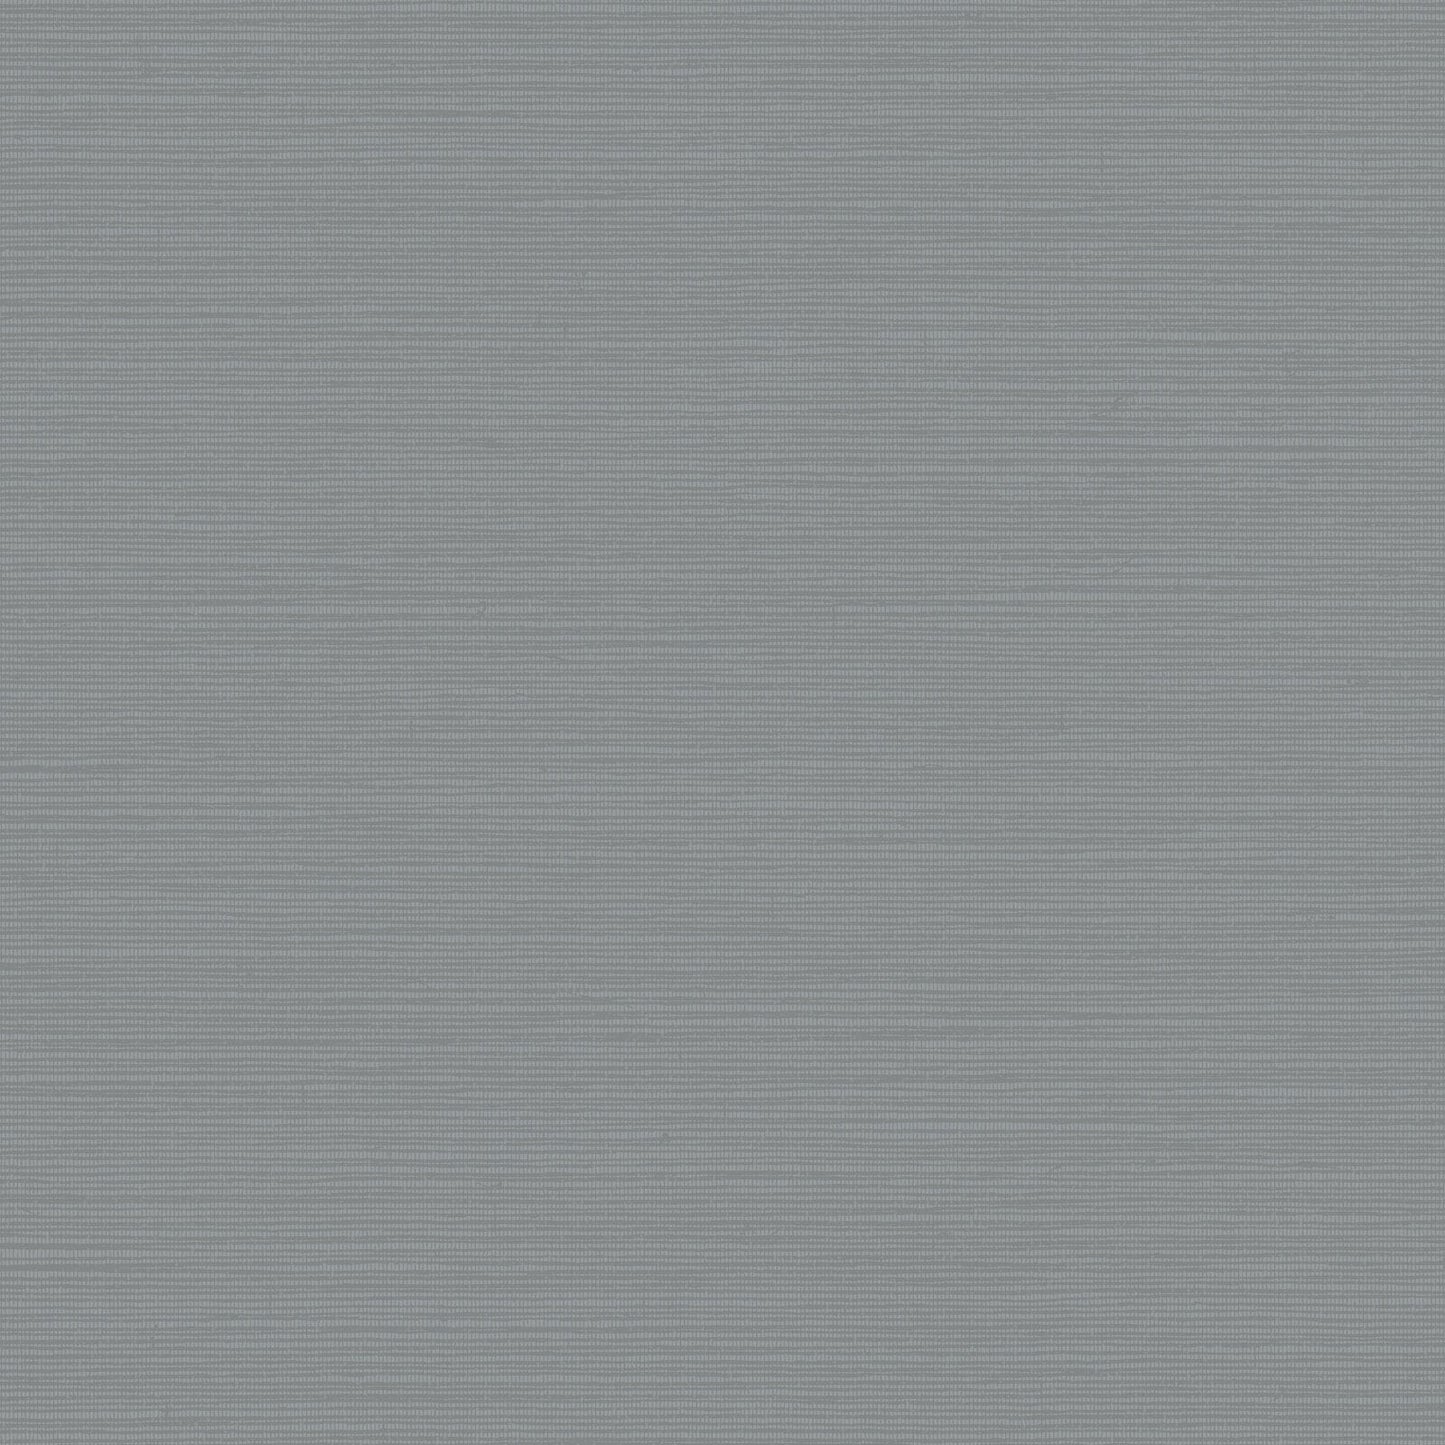 Grasscloth Resource Library Shining Sisal Wallpaper - Silver